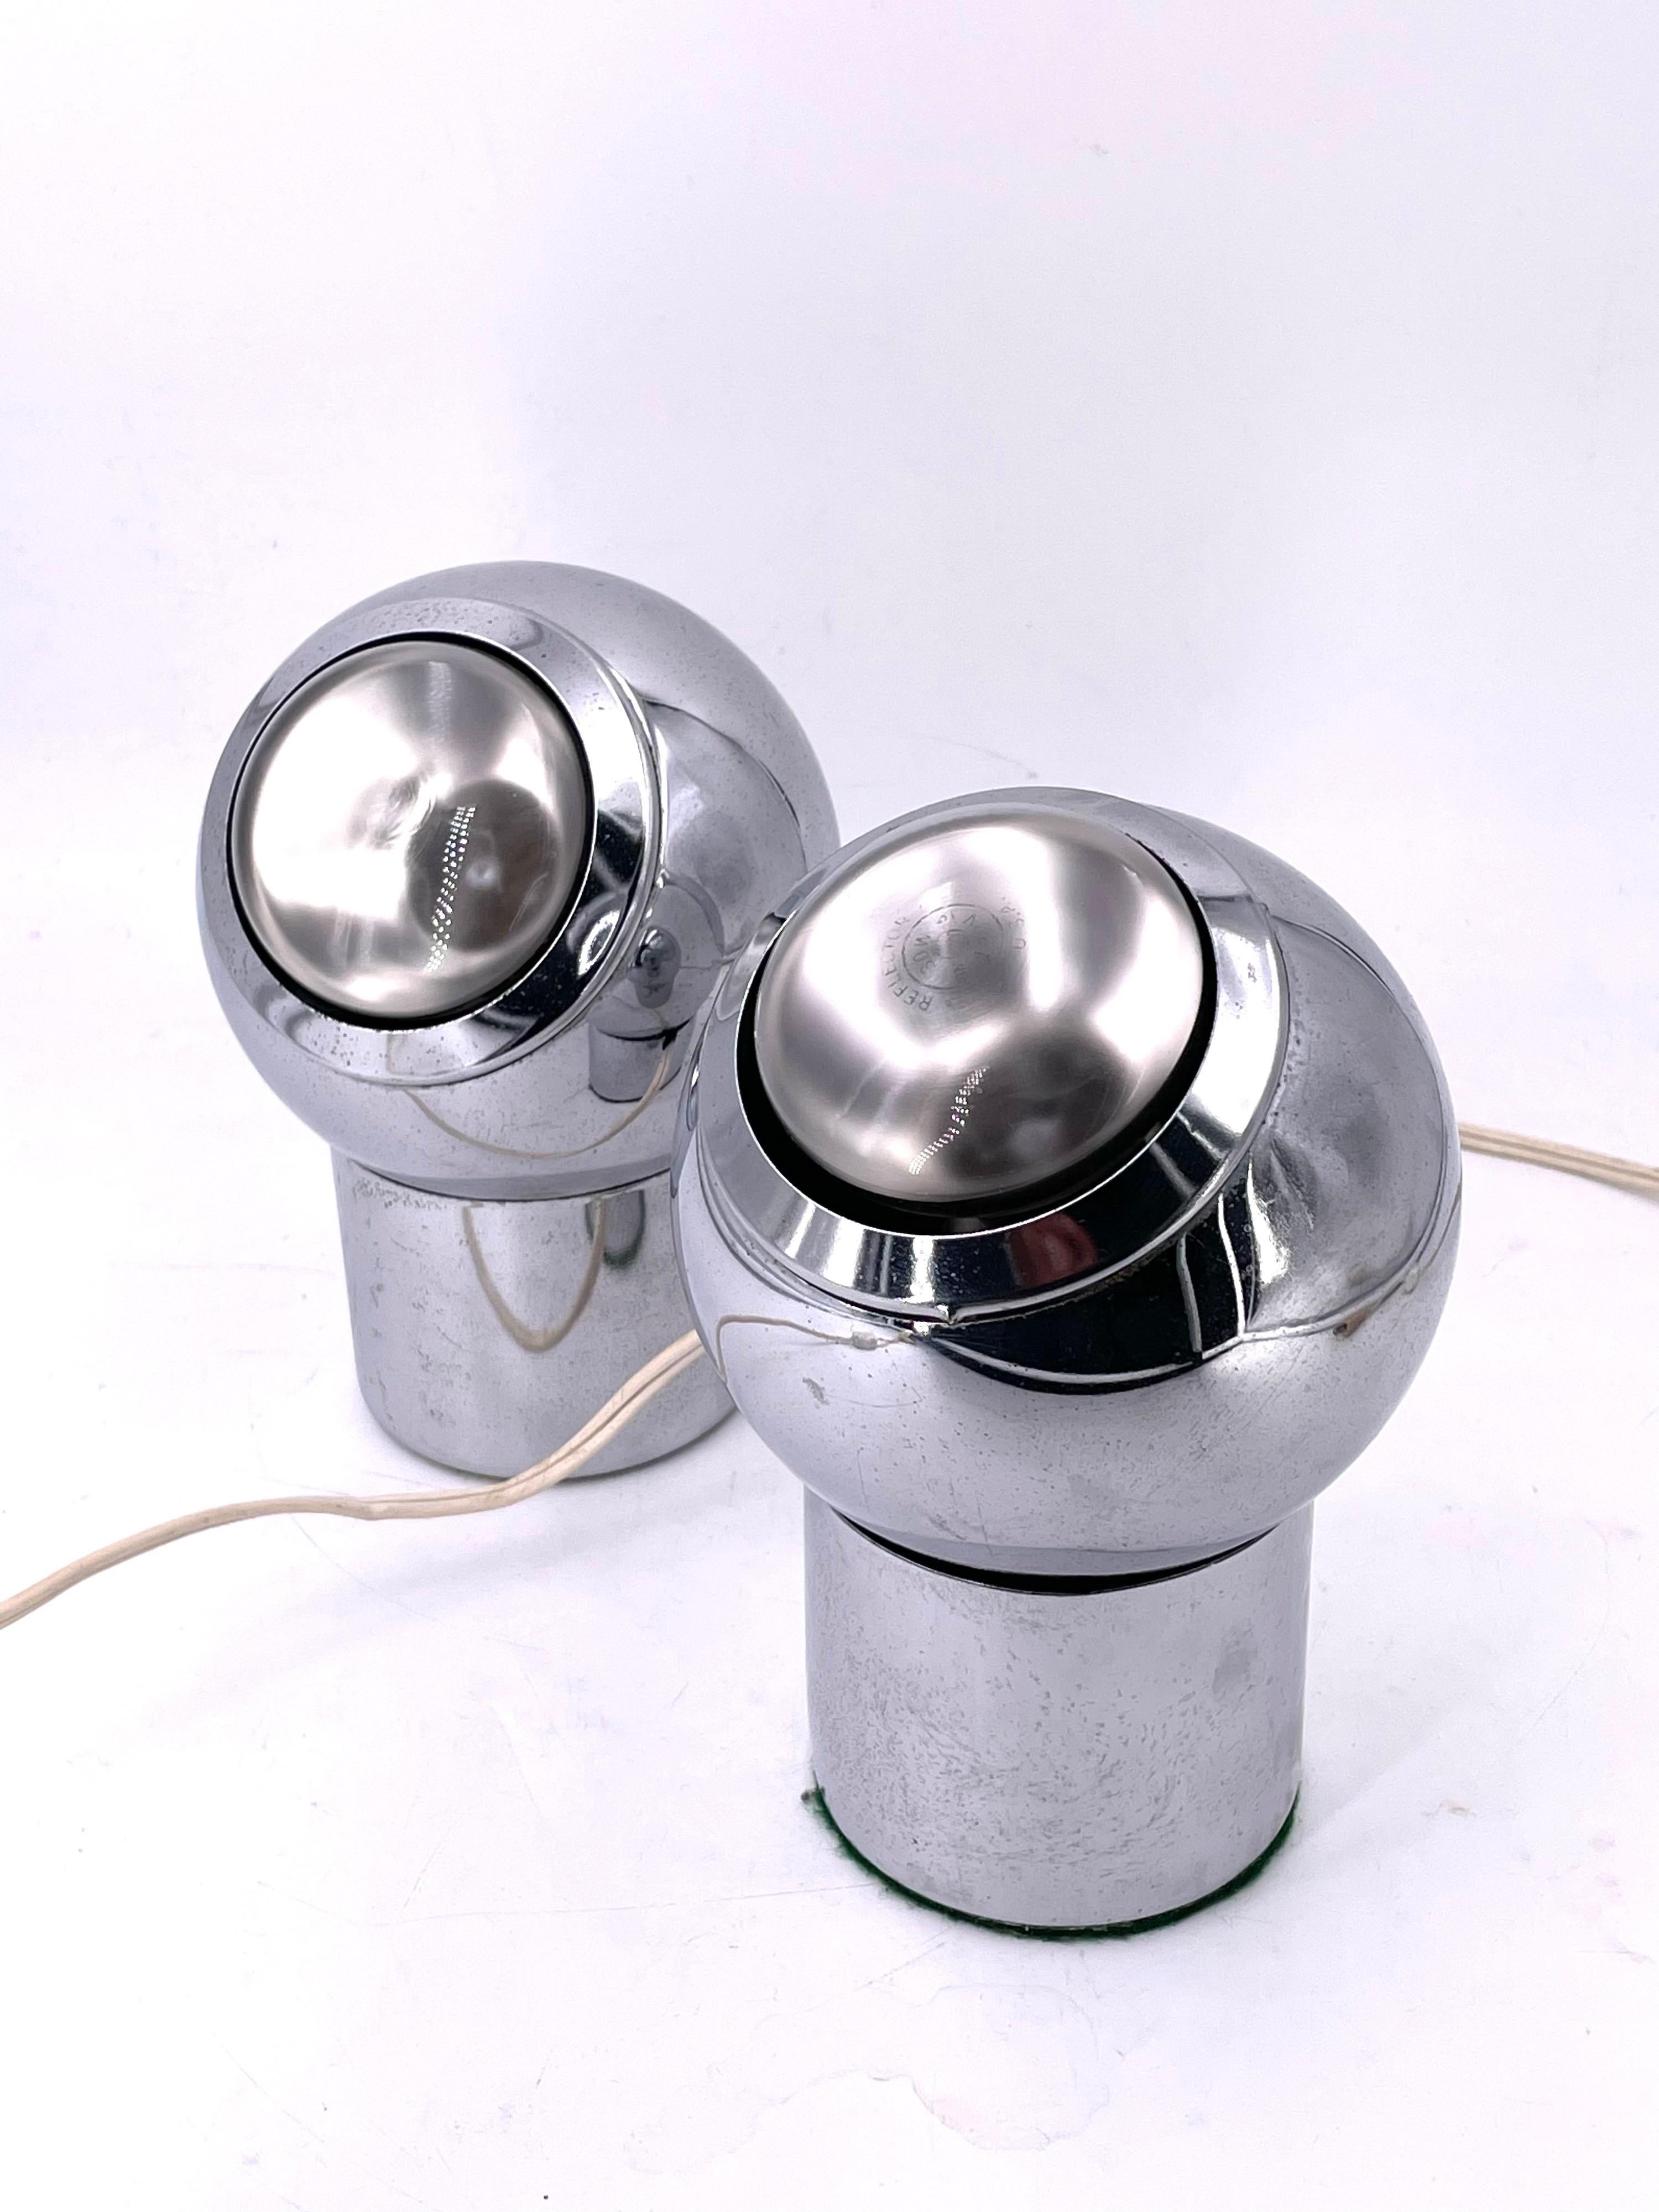 Rare pair of Space-age table lamps circa 1970's in chrome finish perfectly working condition the base it's magnetic and you can drill it to a wall and move it into any position you want.